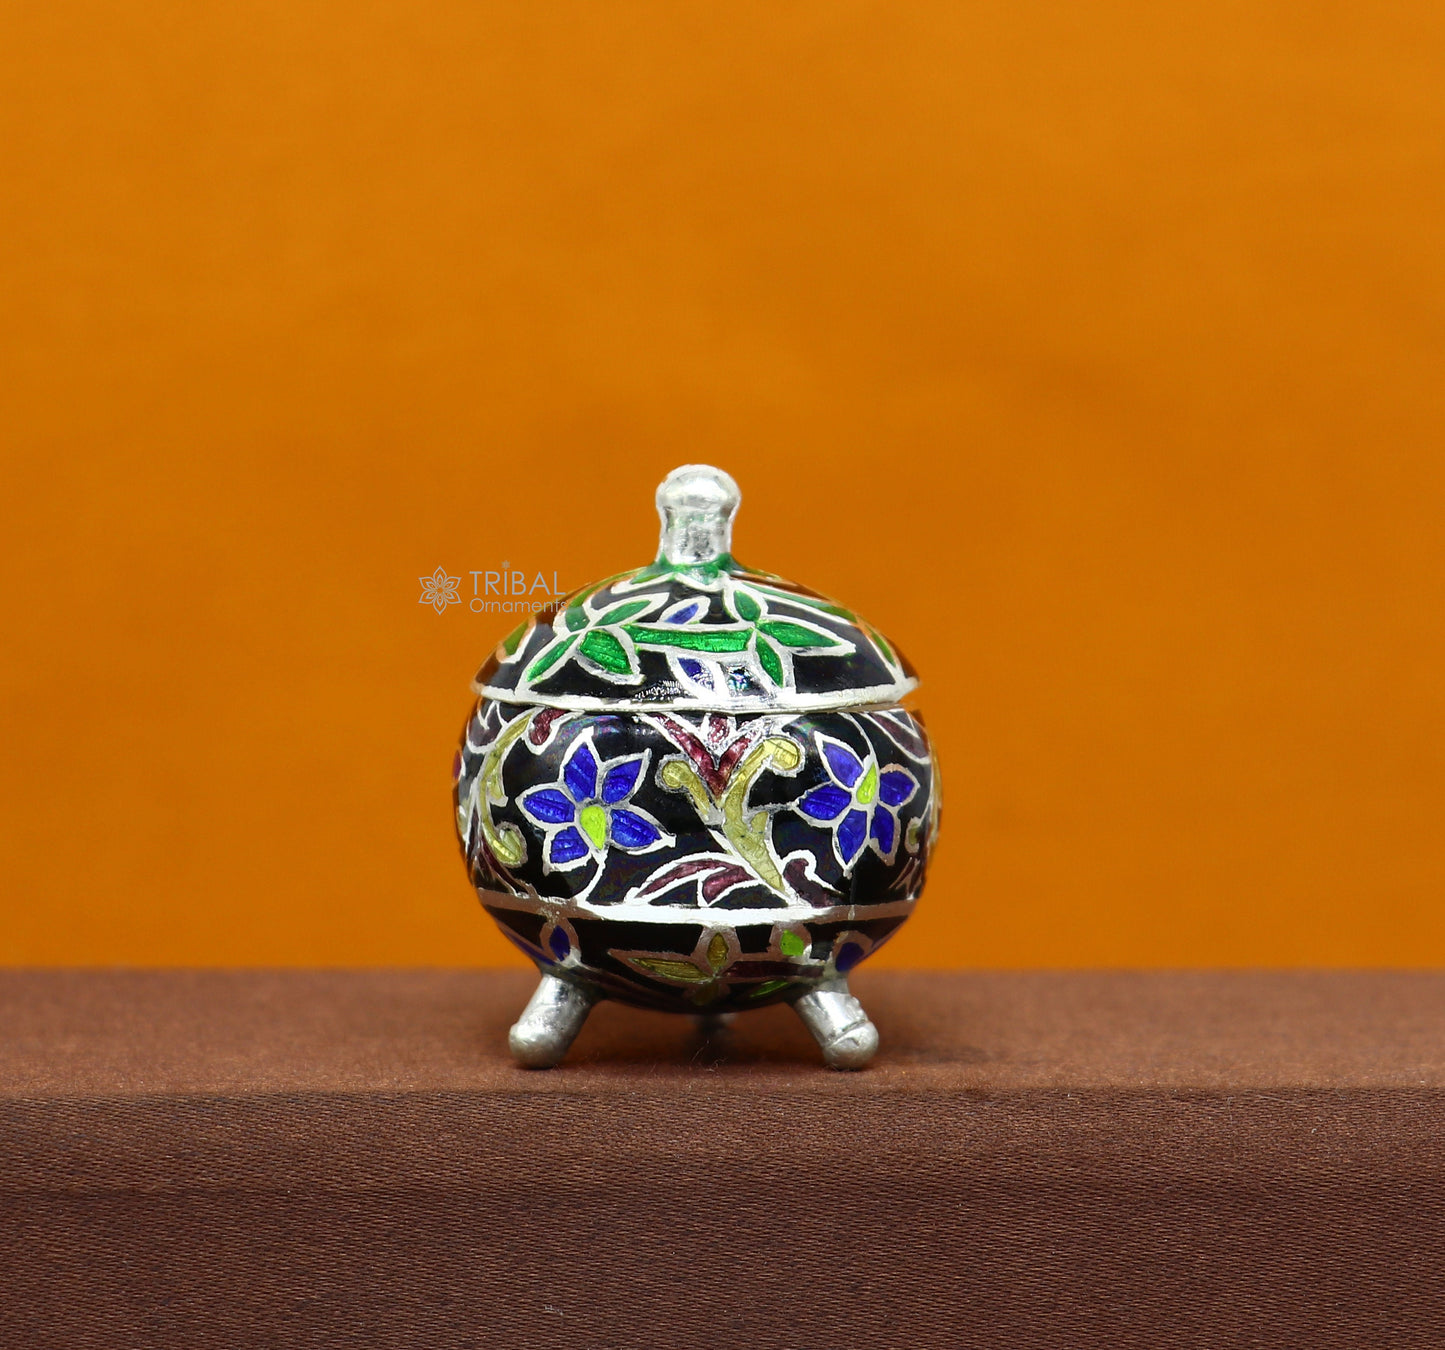 925 Sterling silver handmade fabulous trinket box, Silver container box, casket box, sindoor box, enamel work customized gifting box stb833 - TRIBAL ORNAMENTS